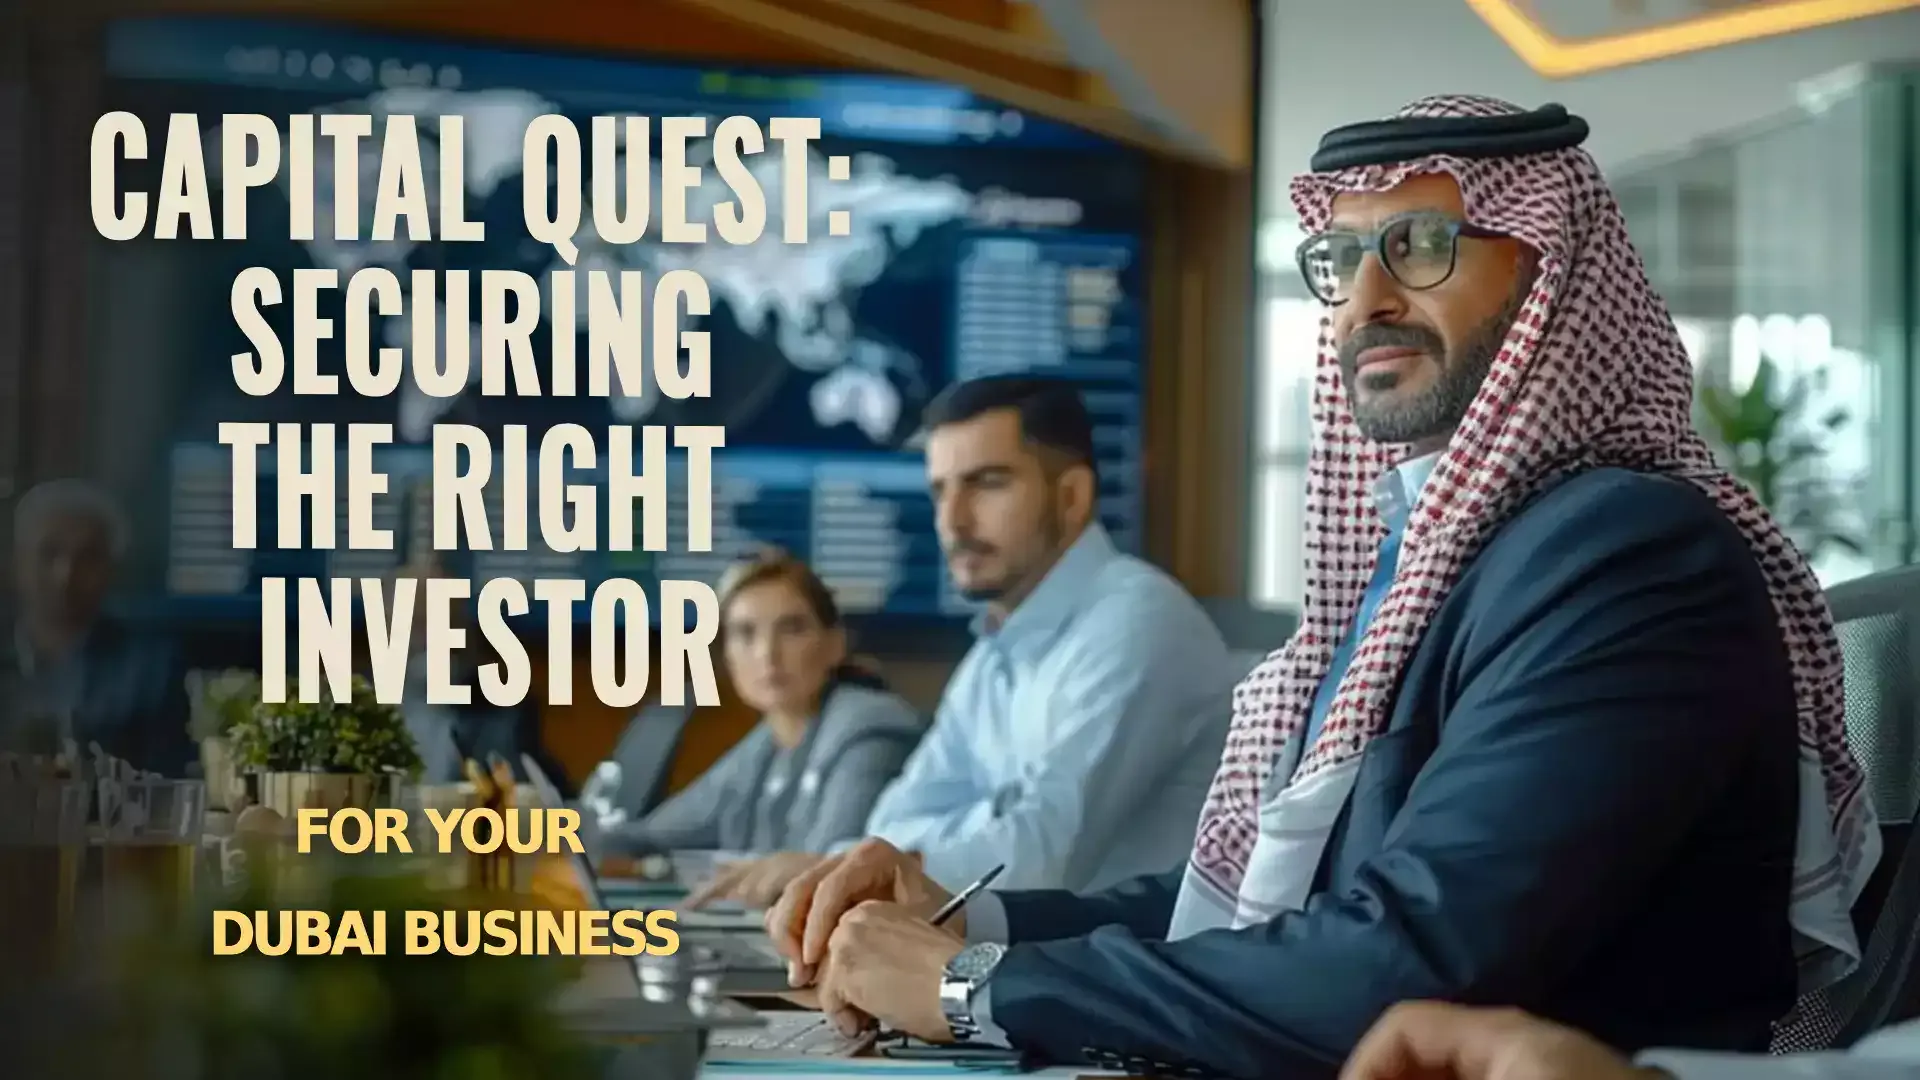 Illustration: Methods to Attract Investors for Business in Dubai